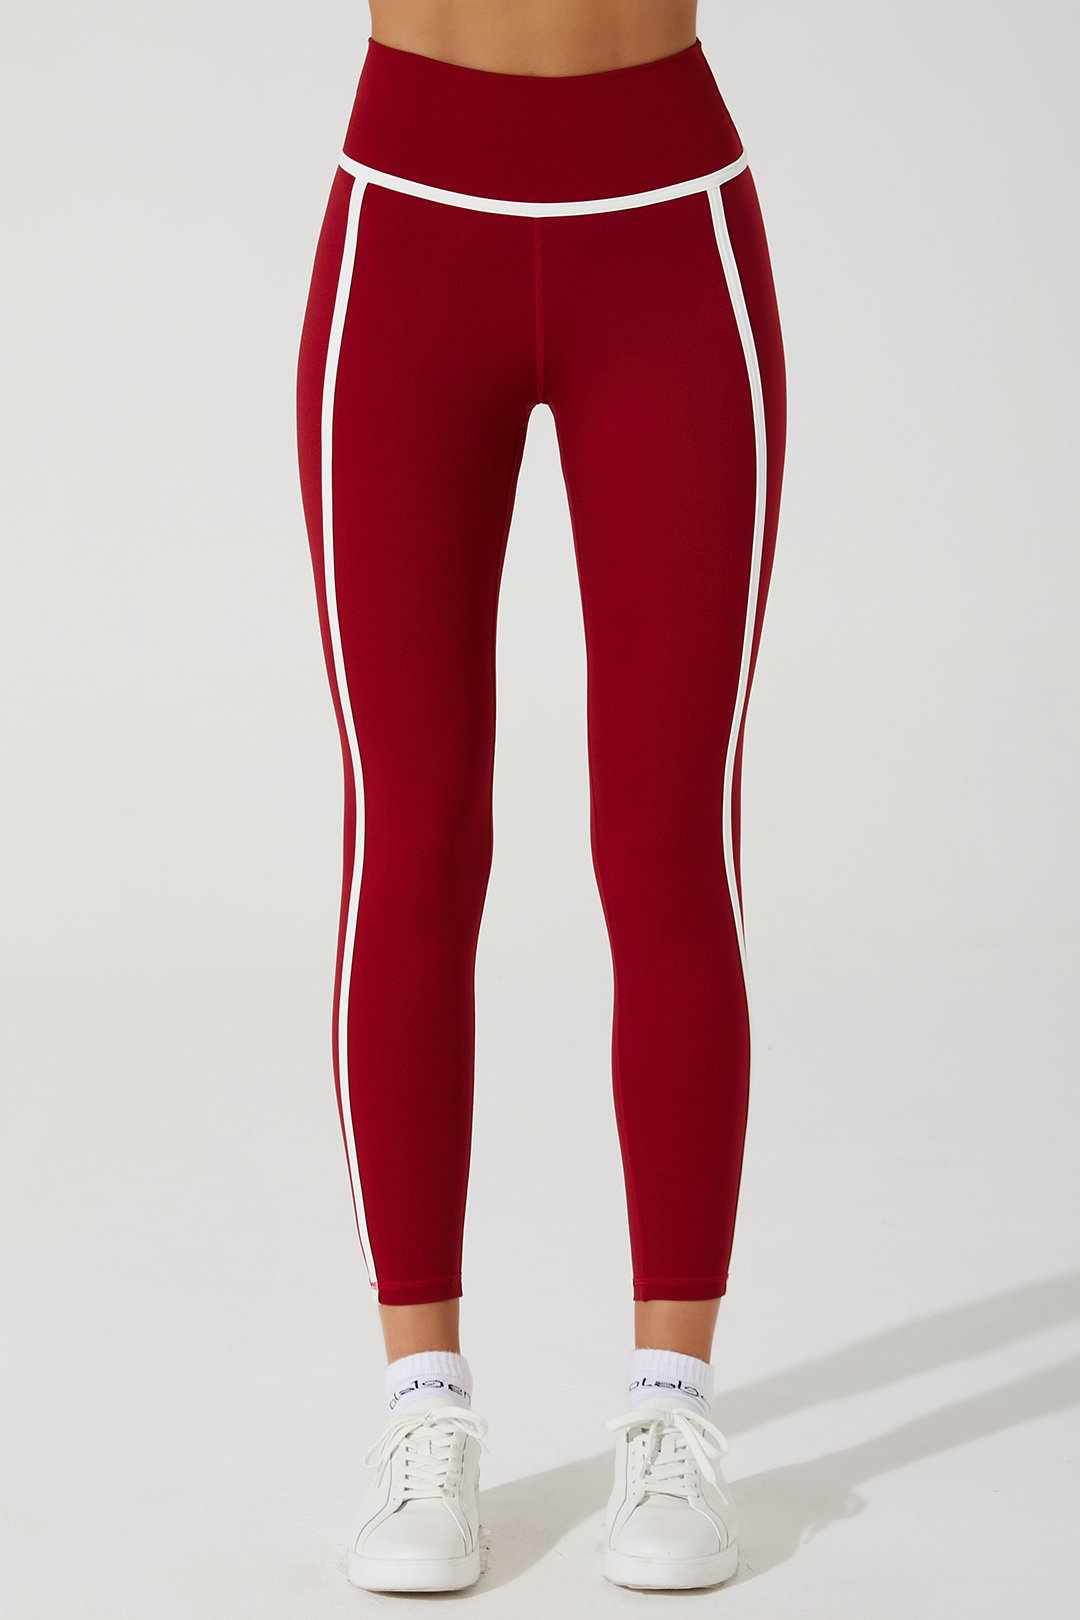 Vibrant magenta and red women's leggings with a lively and fashionable design - OW-0050-WLG-RD_3.